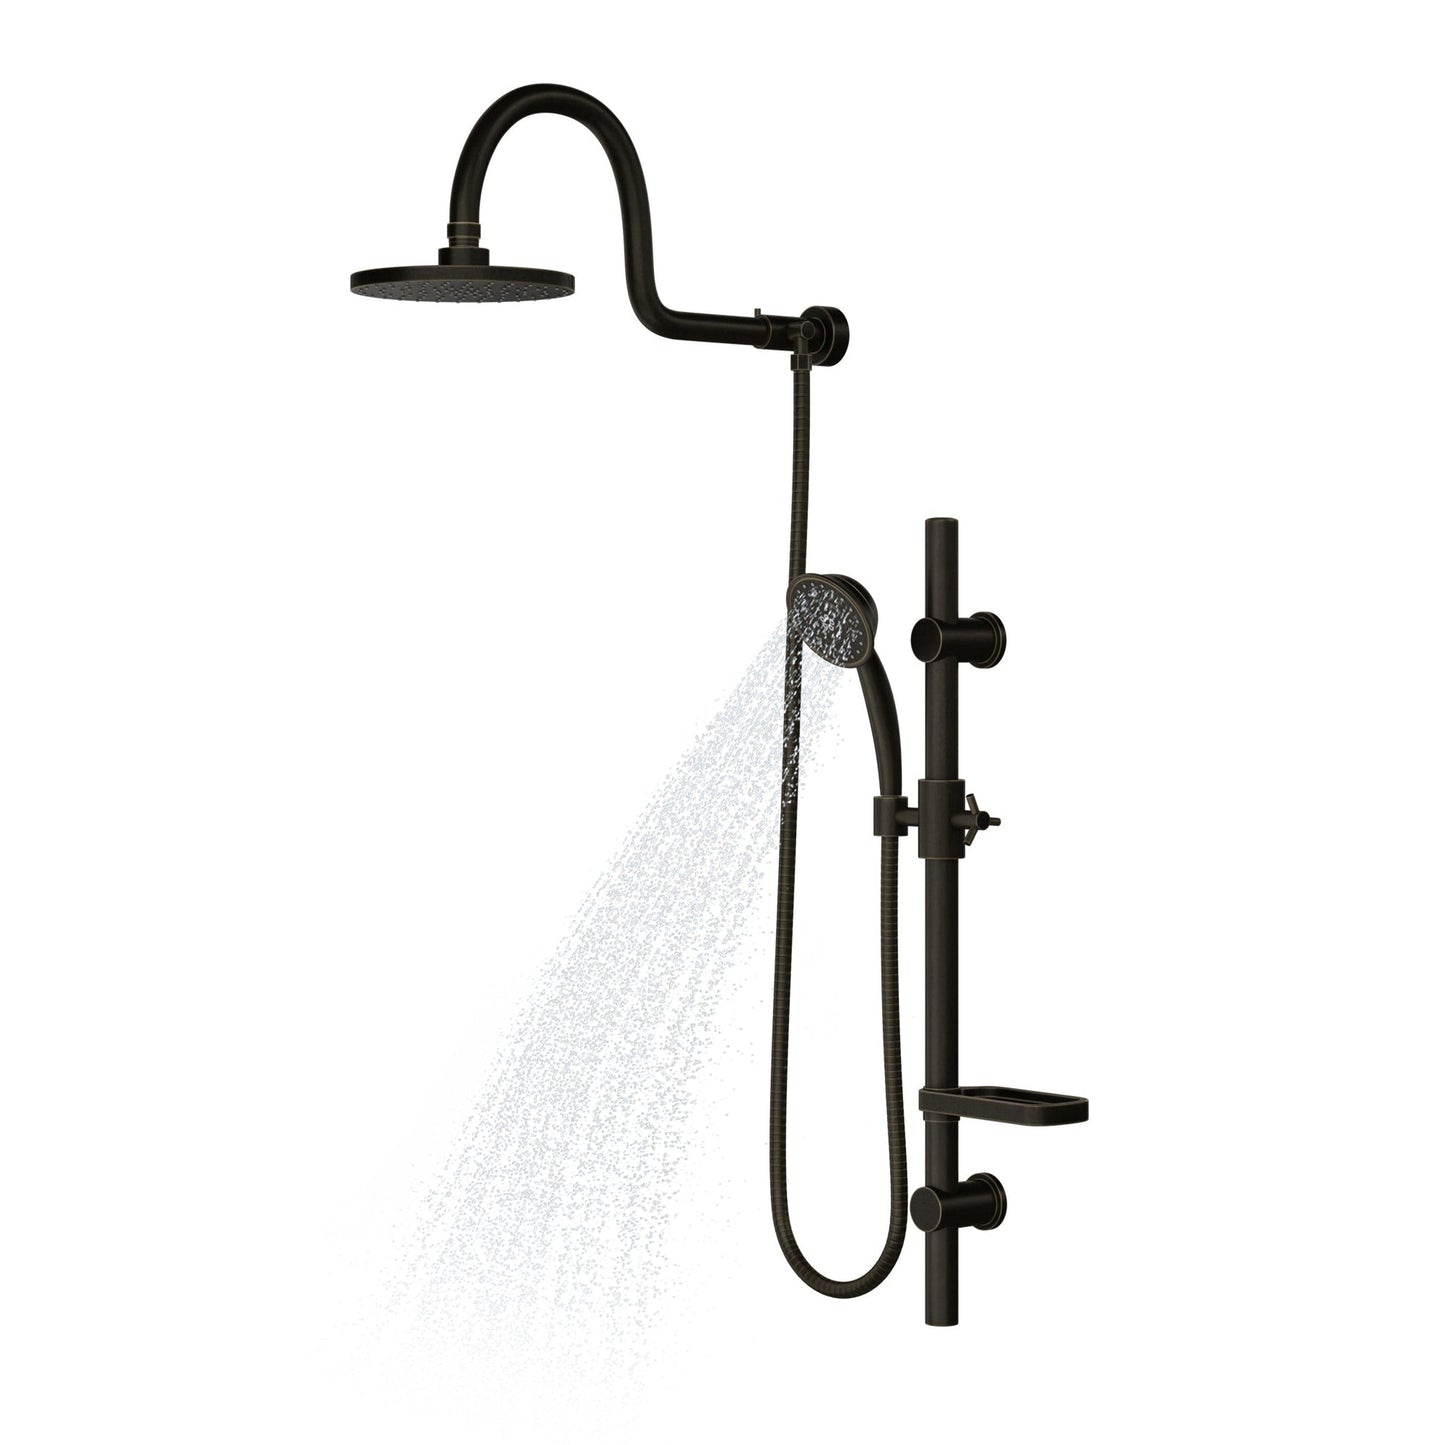 PULSE ShowerSpas AquaRain 2.5 GPM Shower System in Oil Rubbed Bronze Finish With Rain Shower Head and 5-Function Handheld Shower